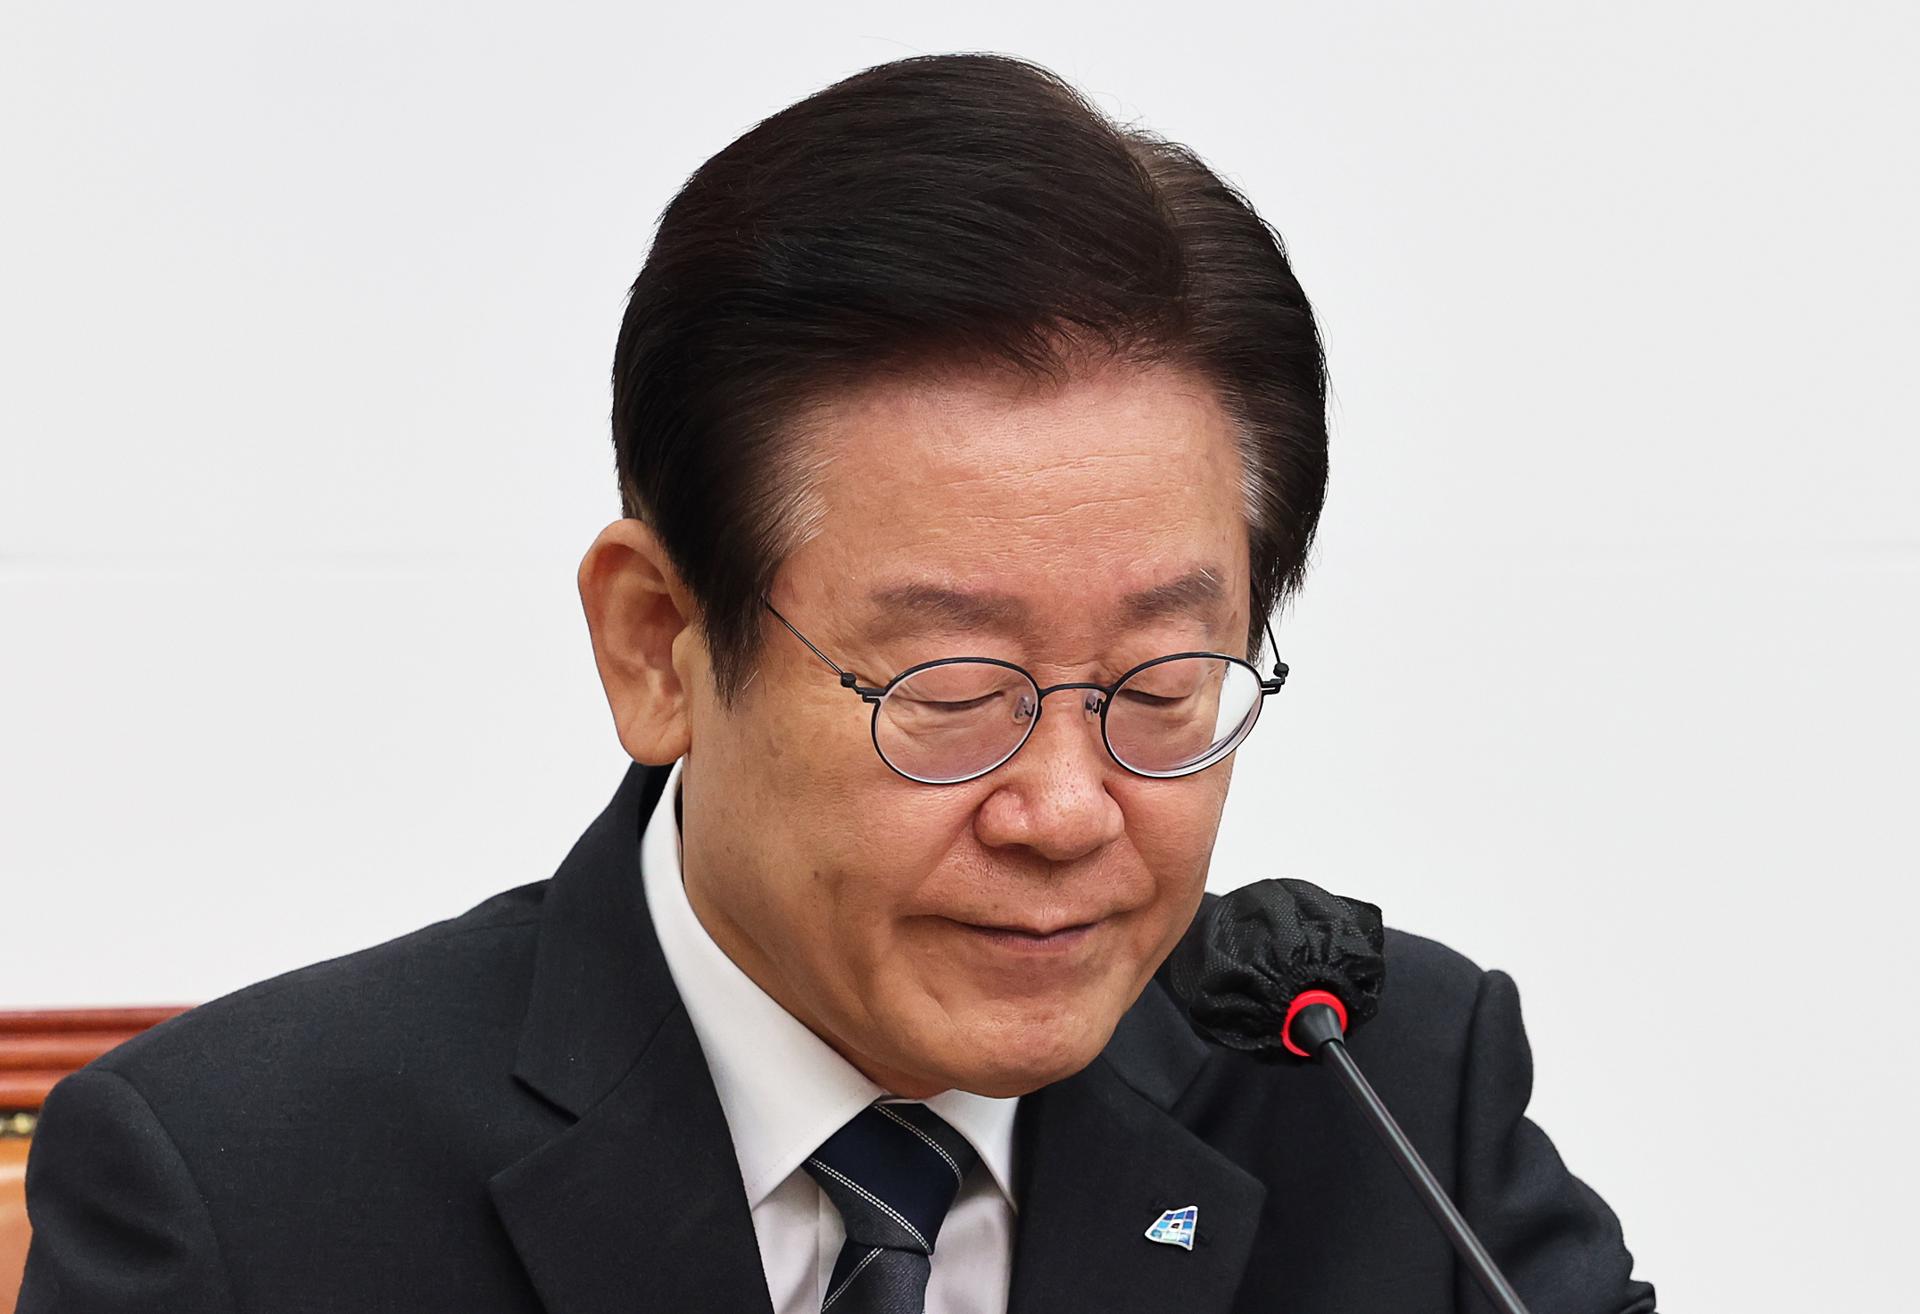 Lee Jae-myung, head of the main opposition Democratic Party (DP) and a former DP presidential candidate, attends a meeting of the DP leadership at the National Assembly in Seoul, South Korea, 24 October 2022. EFE-EPA FILE/YONHAP/POOL SOUTH KOREA OUT